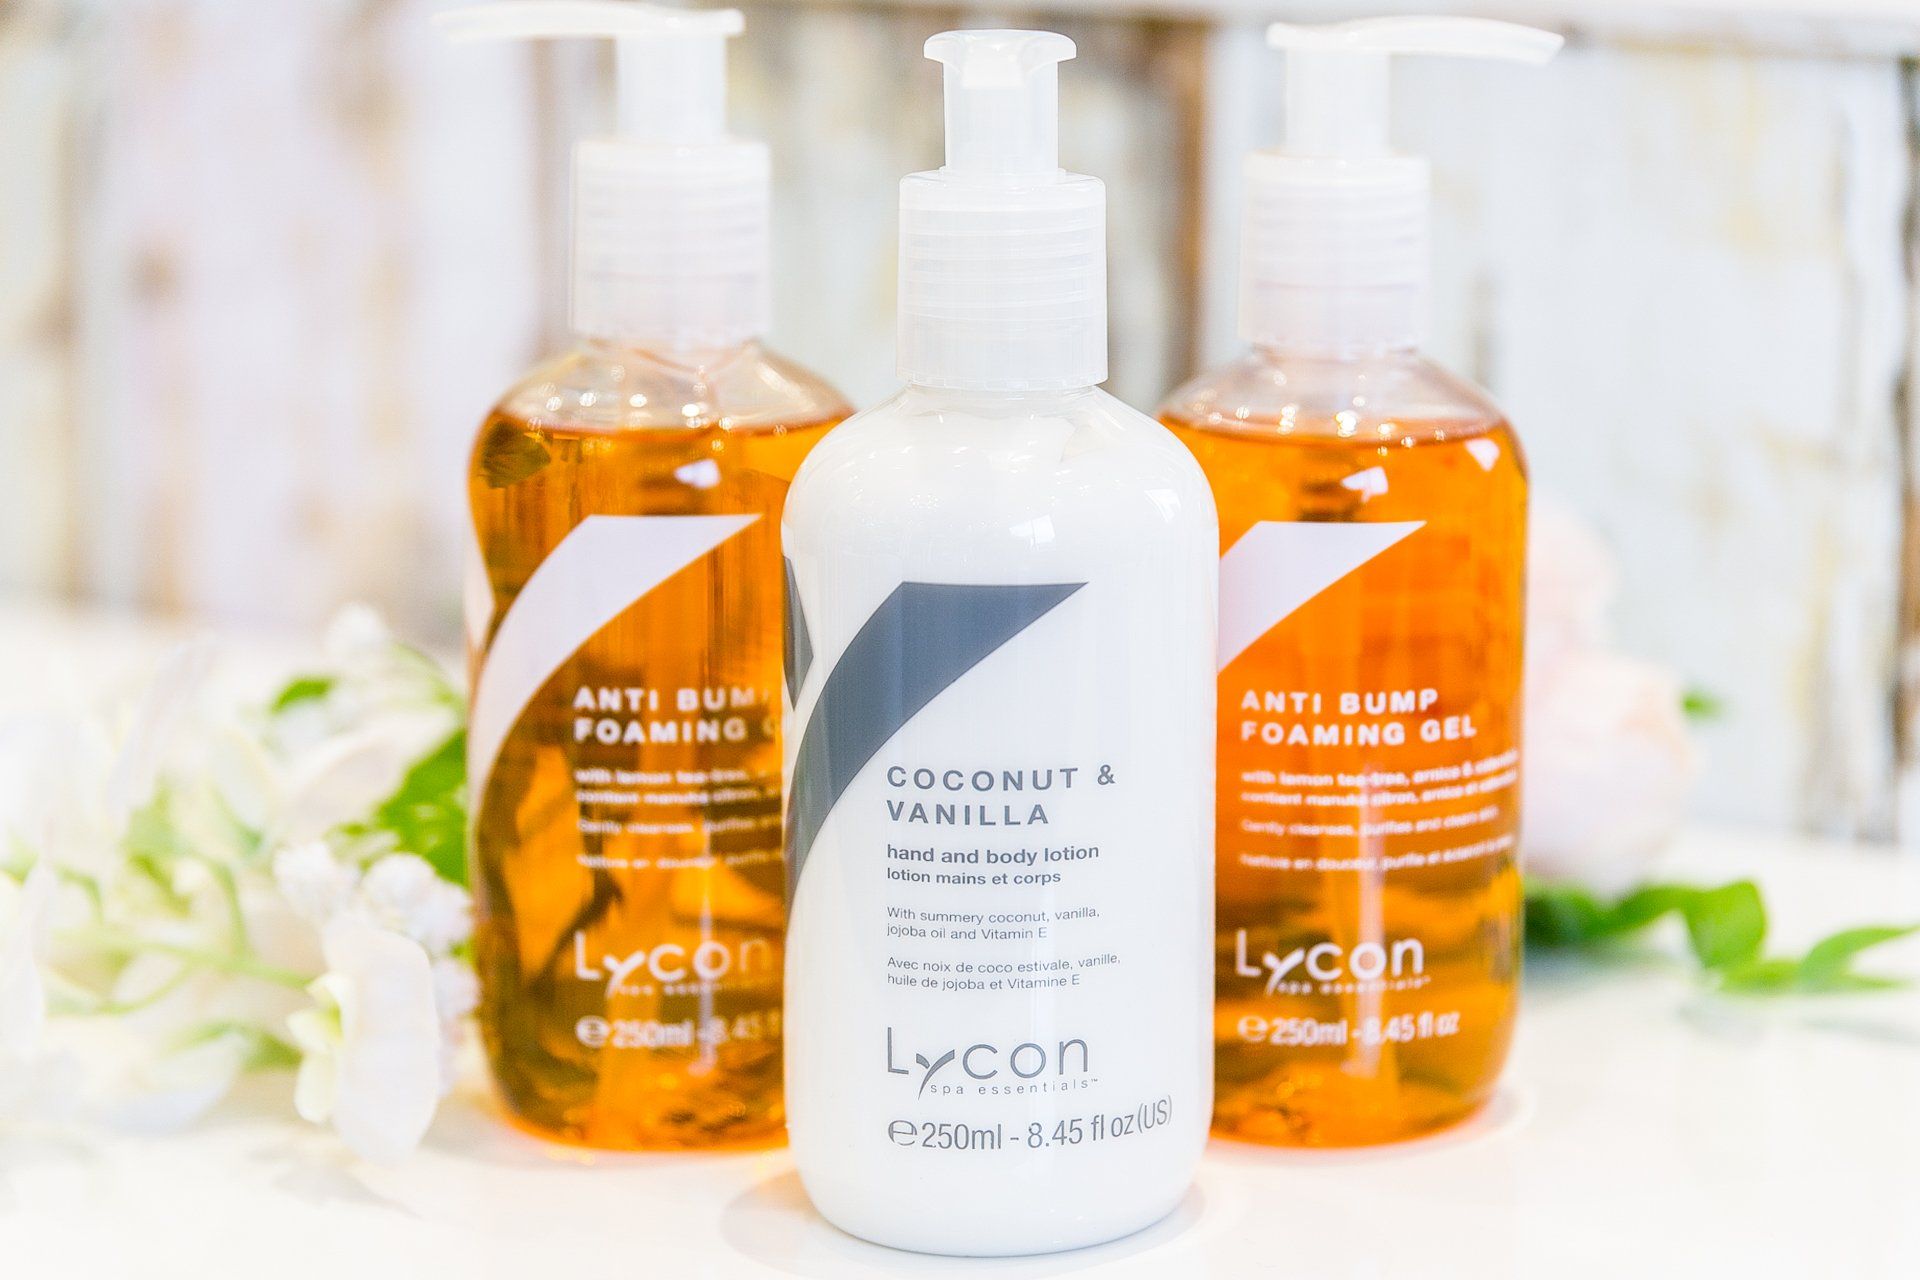 Lycon waxing product